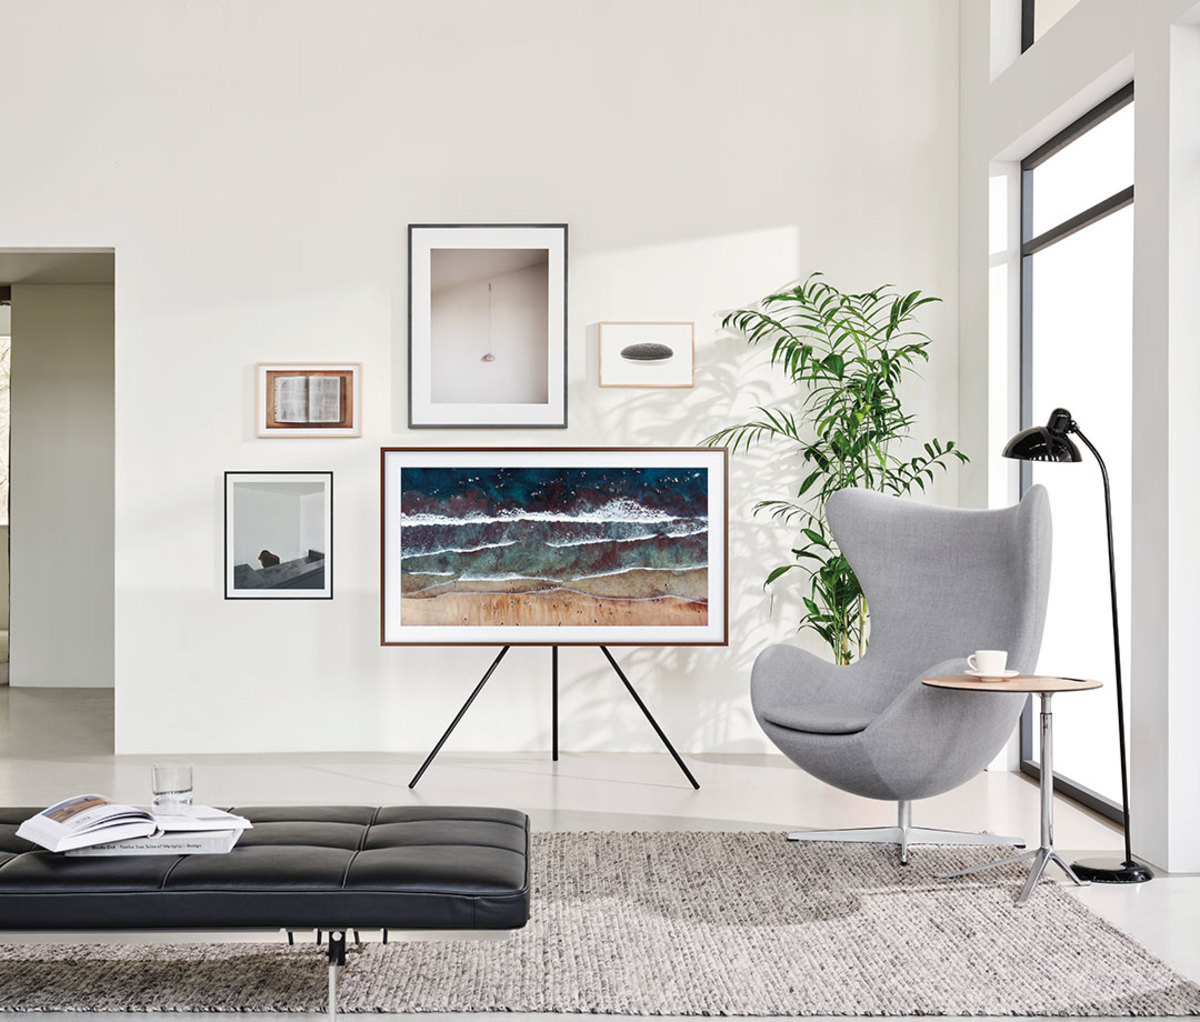 The Frame TV on an easle with photos surrounding it